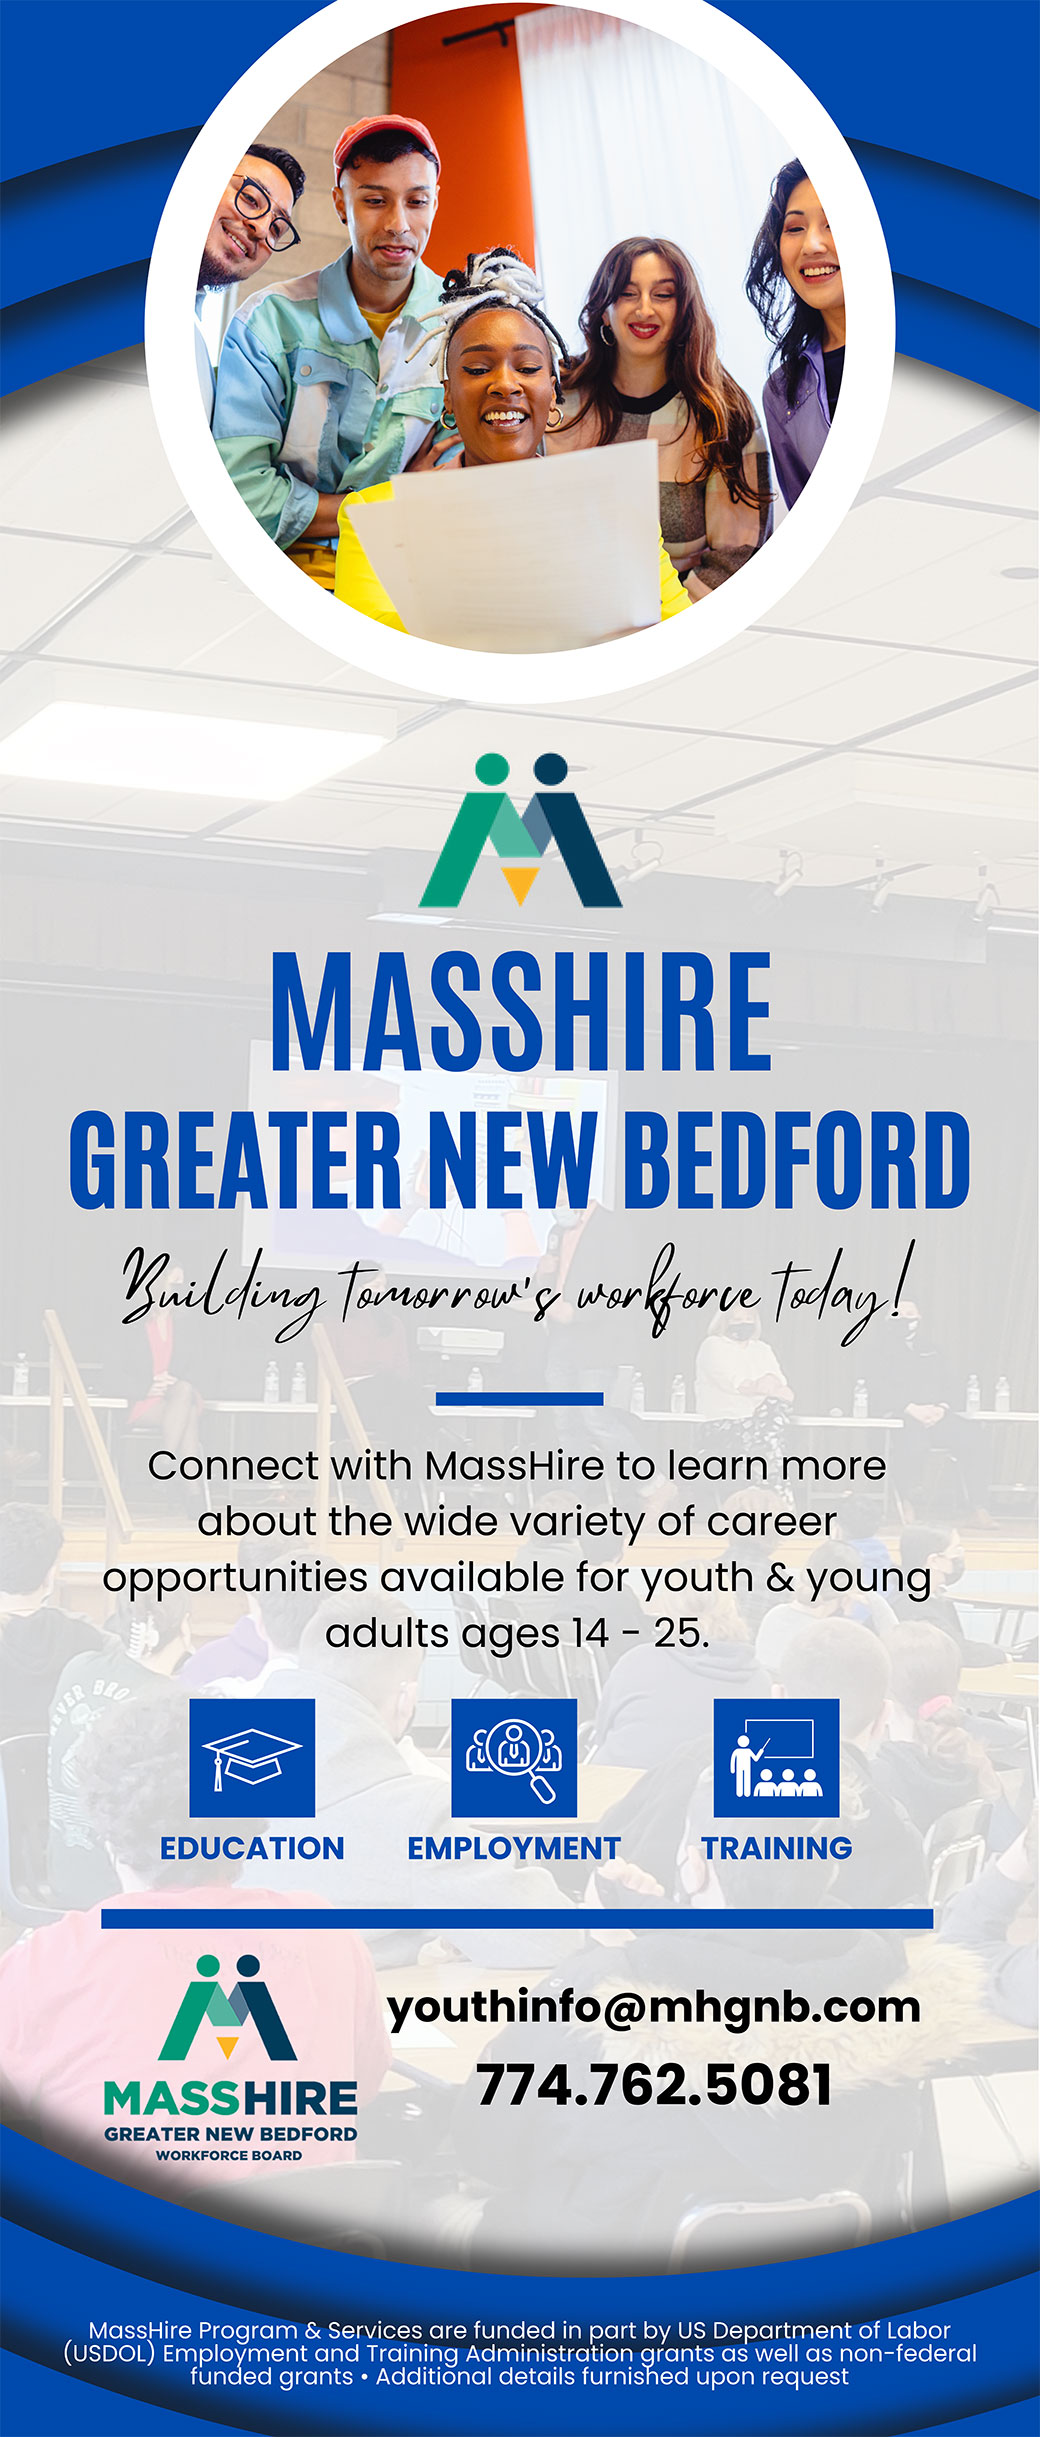 Connect with MassHire to learn more about the wide variety of career opportunities available for youth & young adults ages 14 - 25.